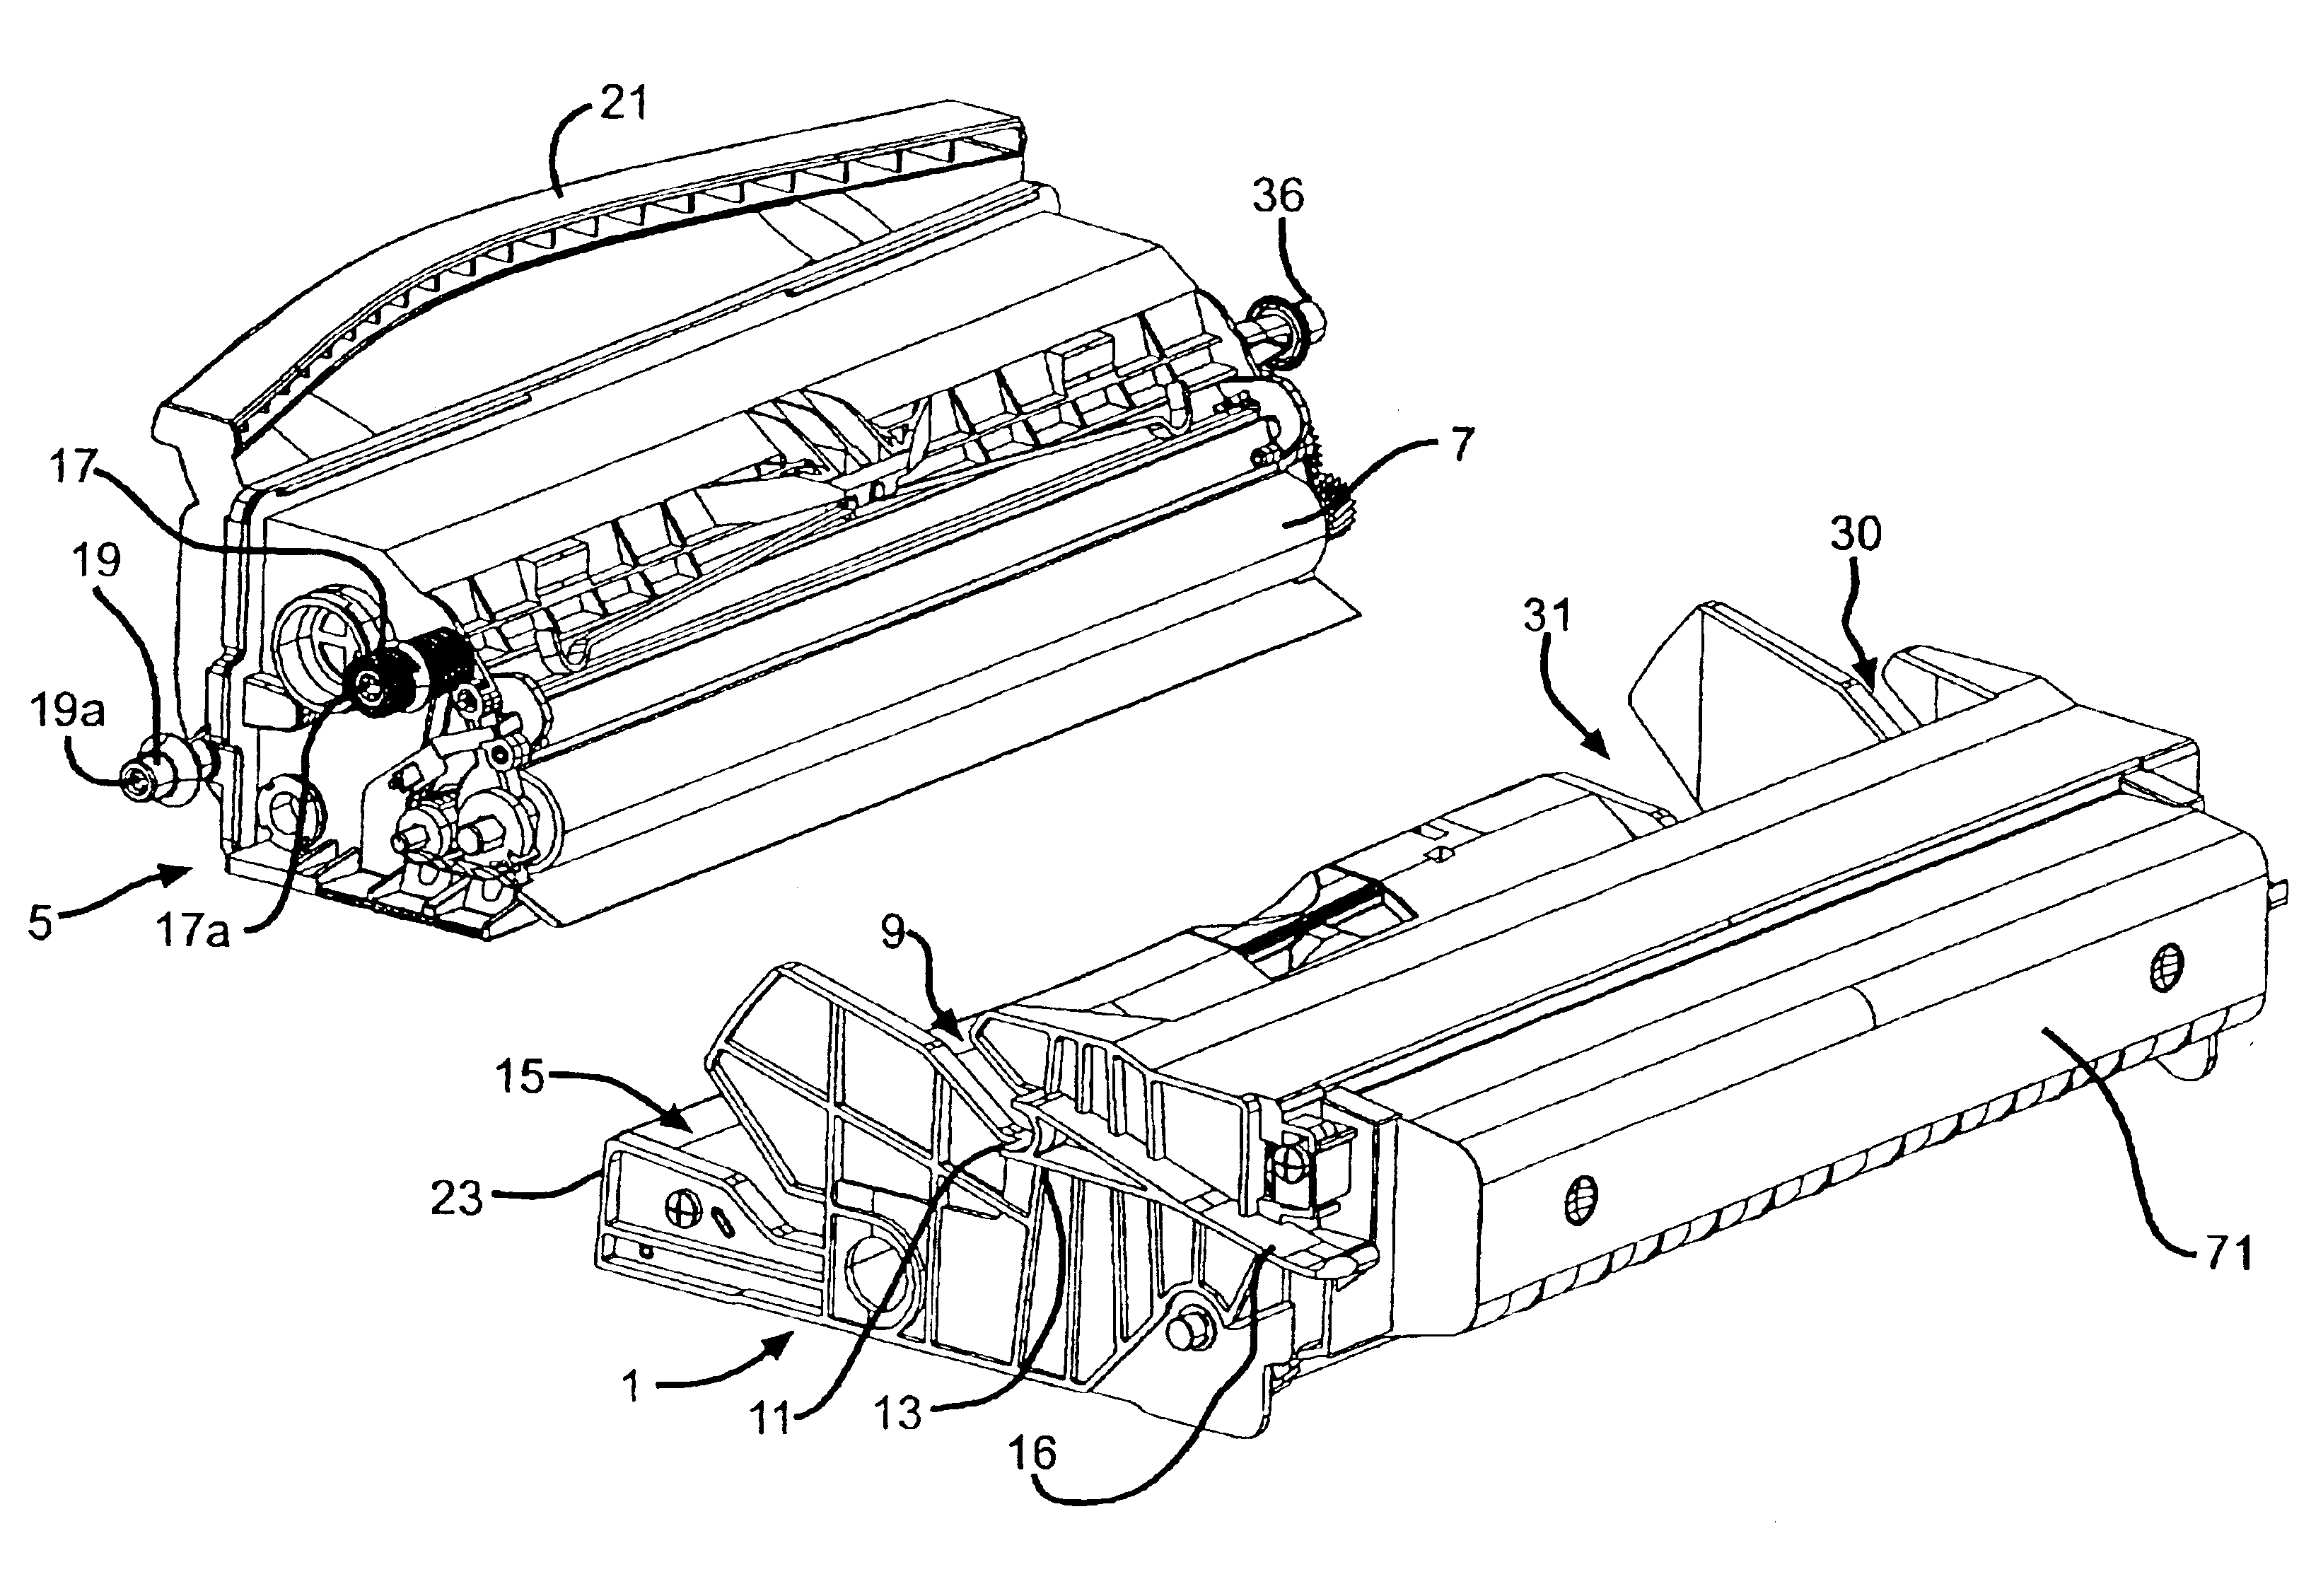 Coupling mechanism for a two piece printer cartridge